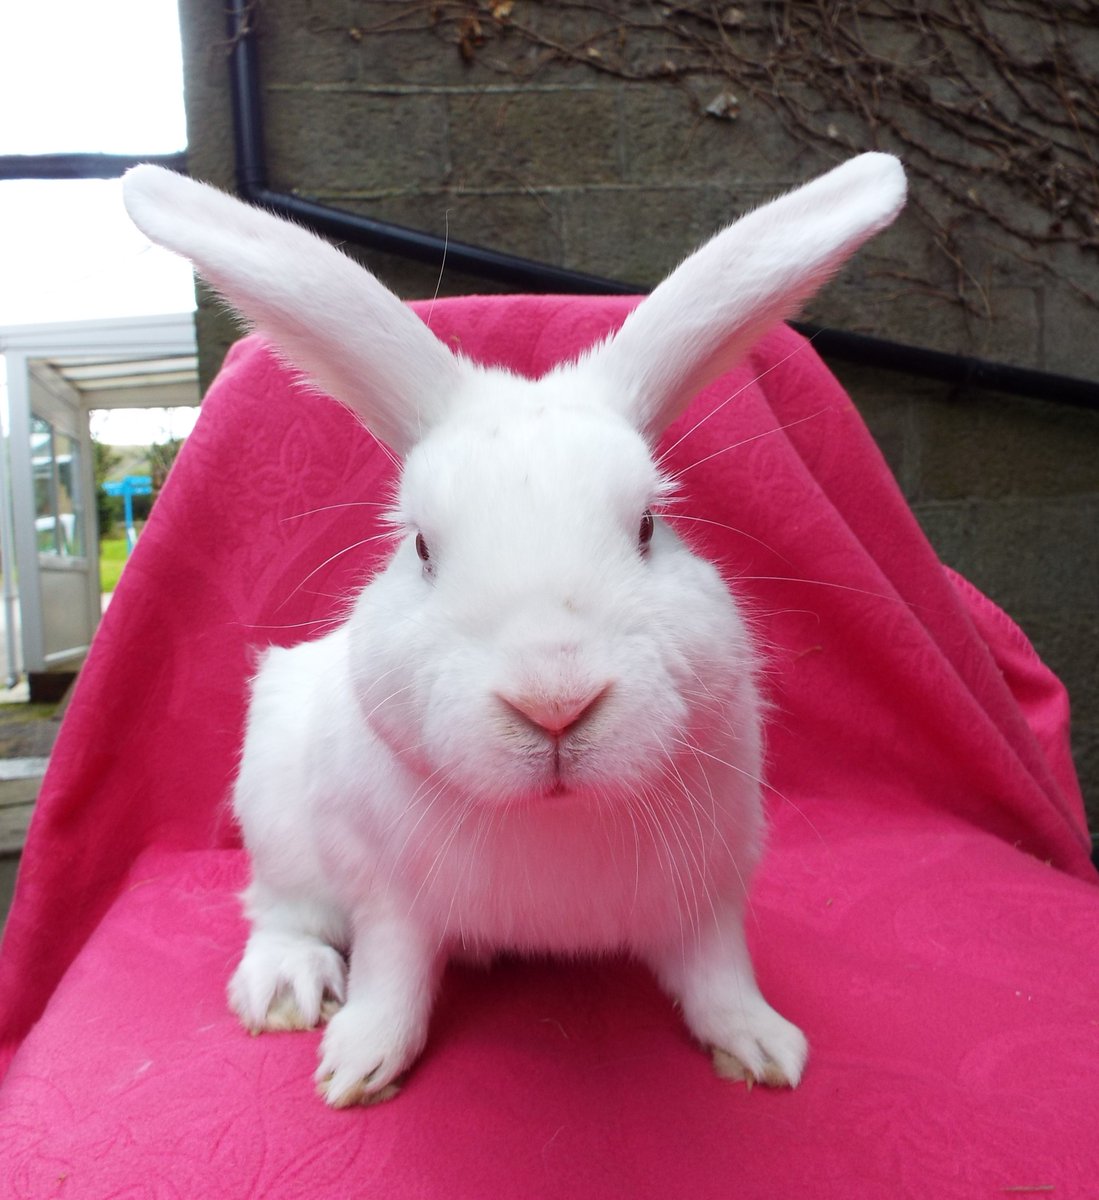 This is Henri who needs a new home, he came to us as a stray. He's around 3 years old, placid & well behaved, he's now neutered & vacced. Details here shortly-bleakholt.org/lancashire-ani… 🙂🐰 #AdoptDontShop #rabbits #bunnies #MondayMotivation #BankHolidayMonday